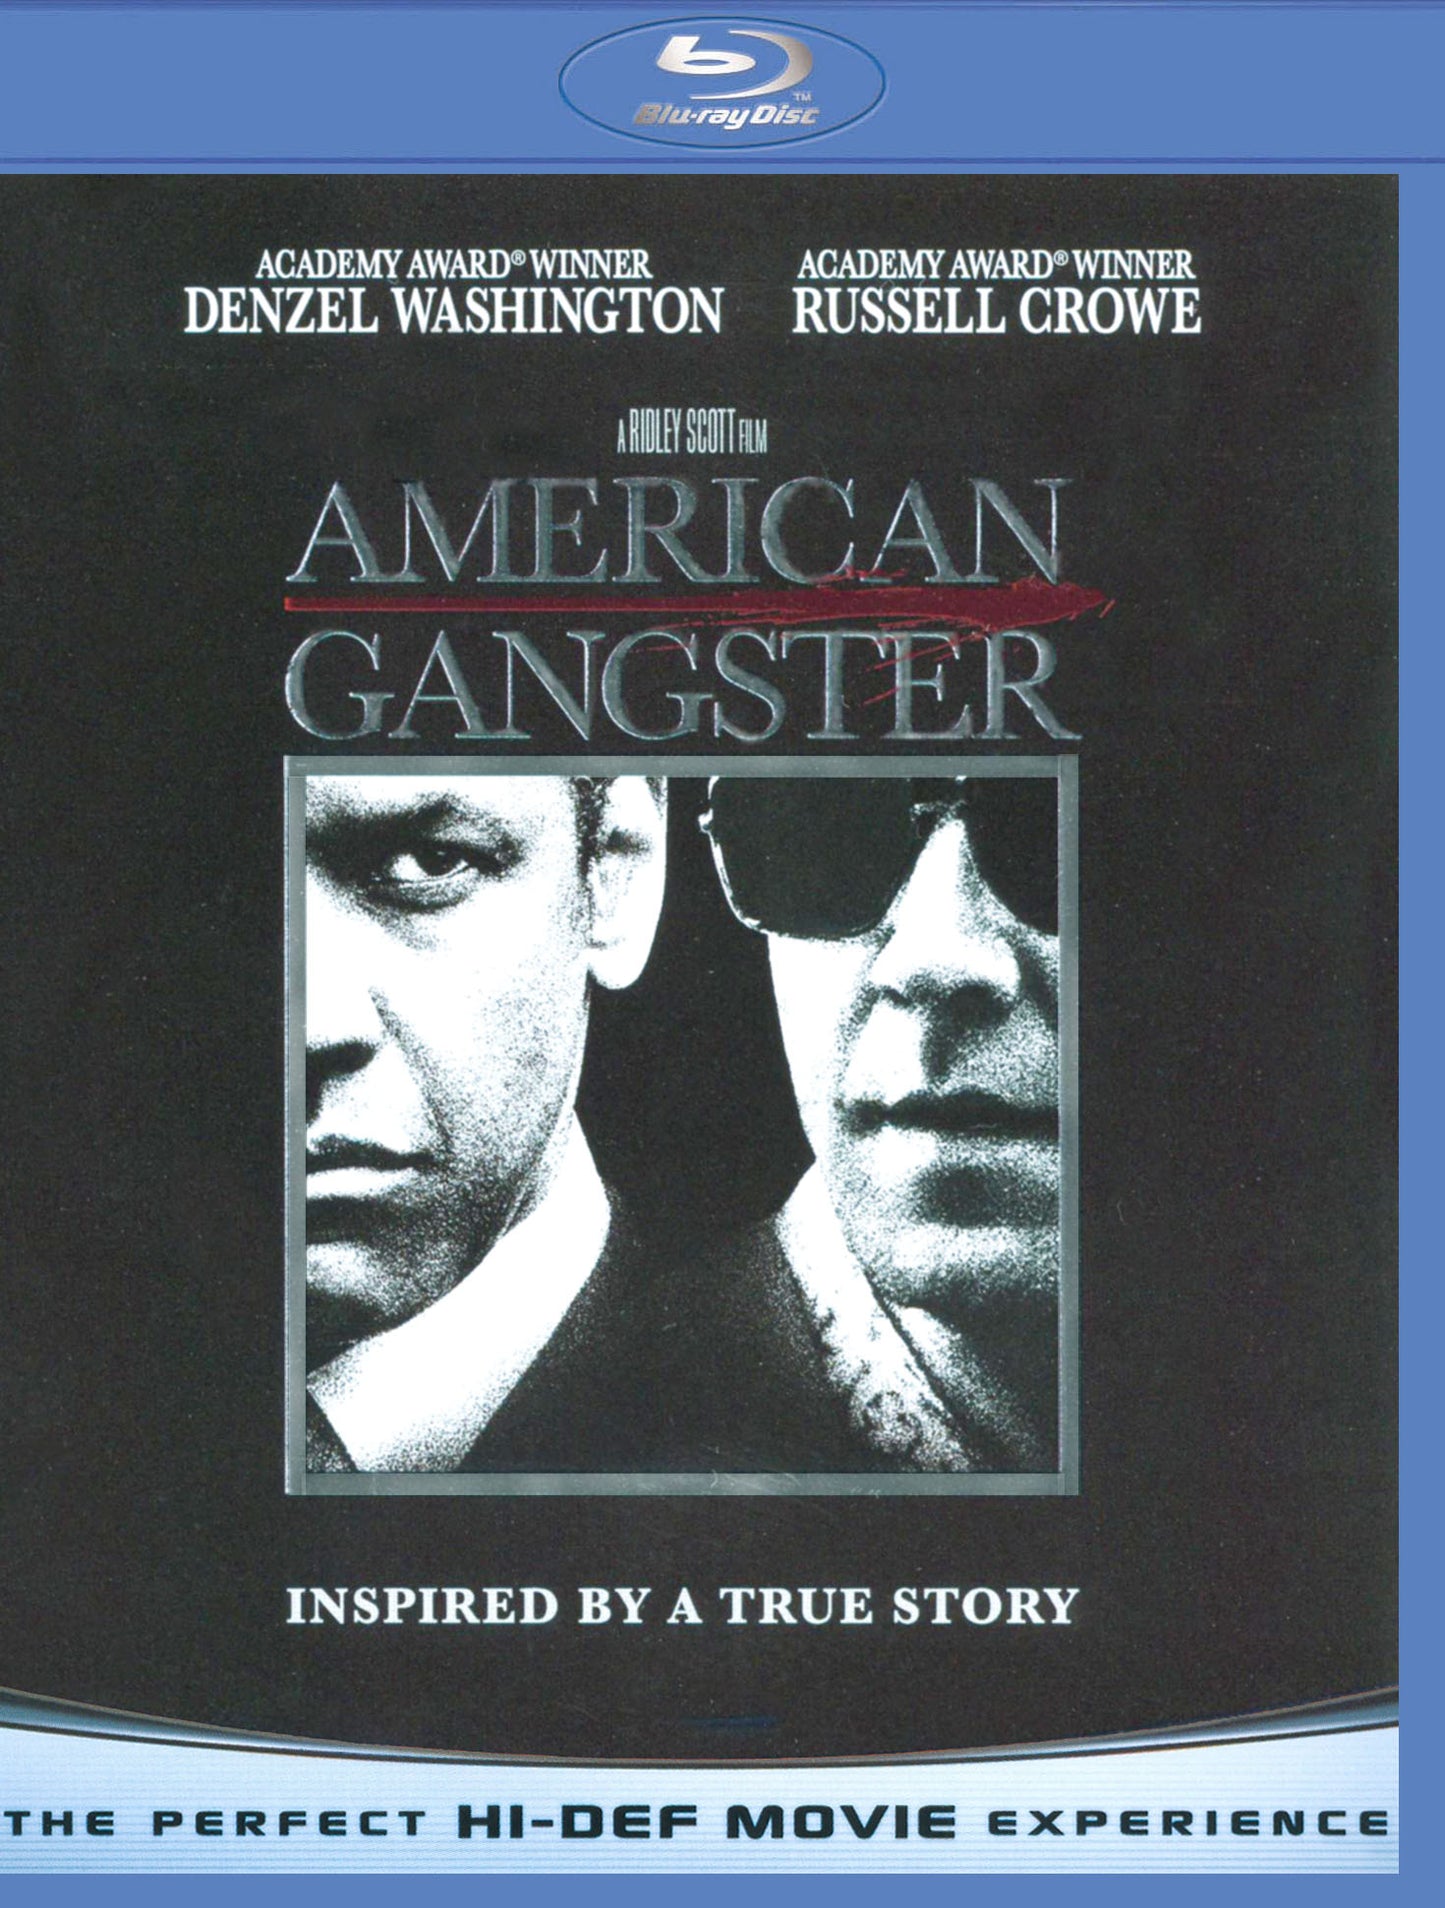 American Gangster [Blu-ray] [Unrated] cover art